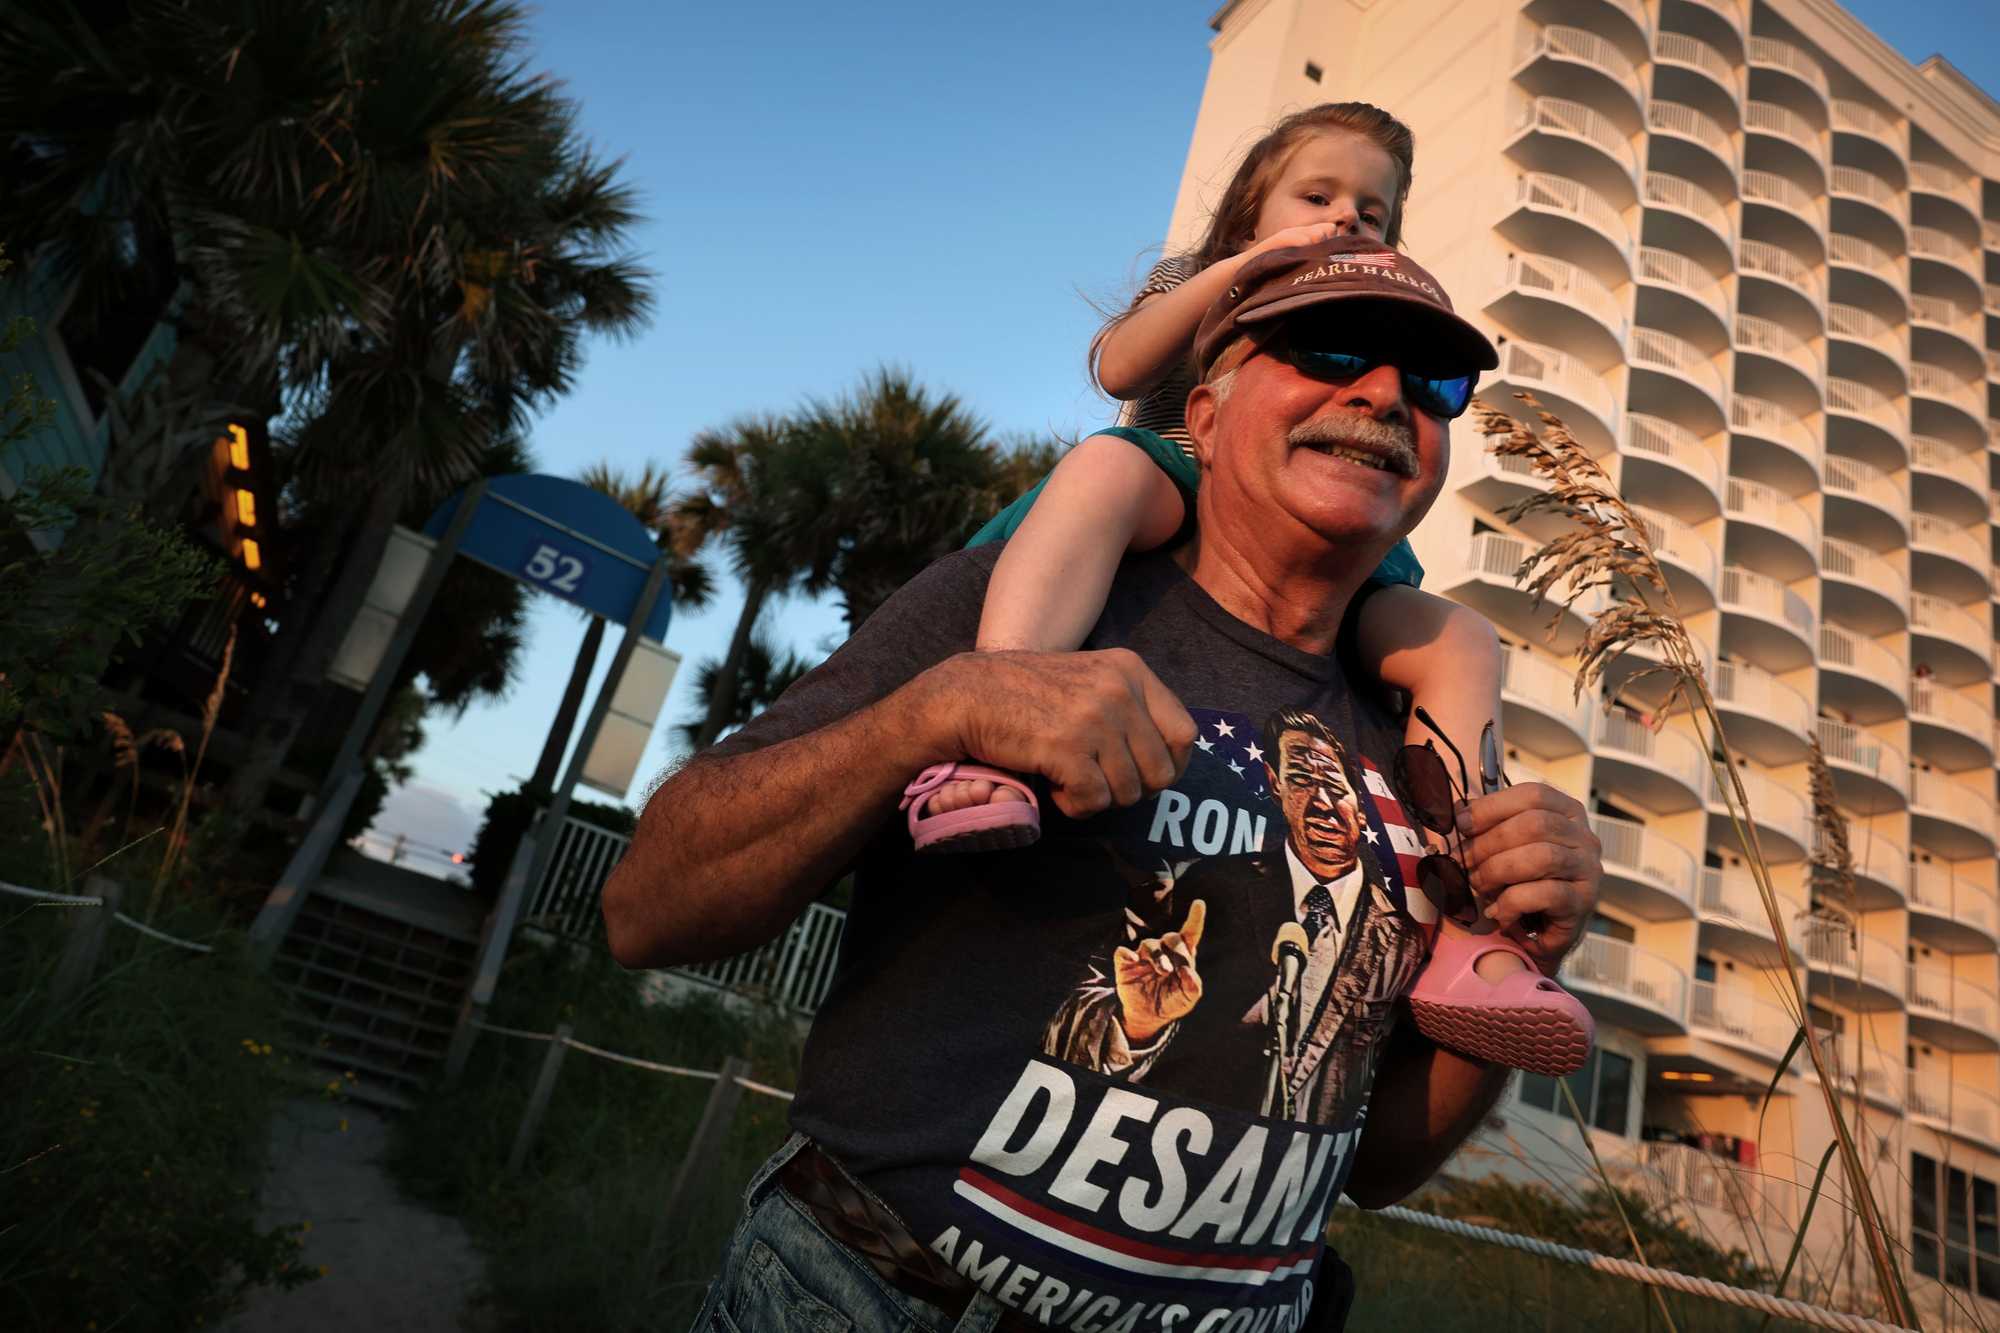 Bob Kufer carried his granddaughter, Shera, from the beach in Panama City Beach.
